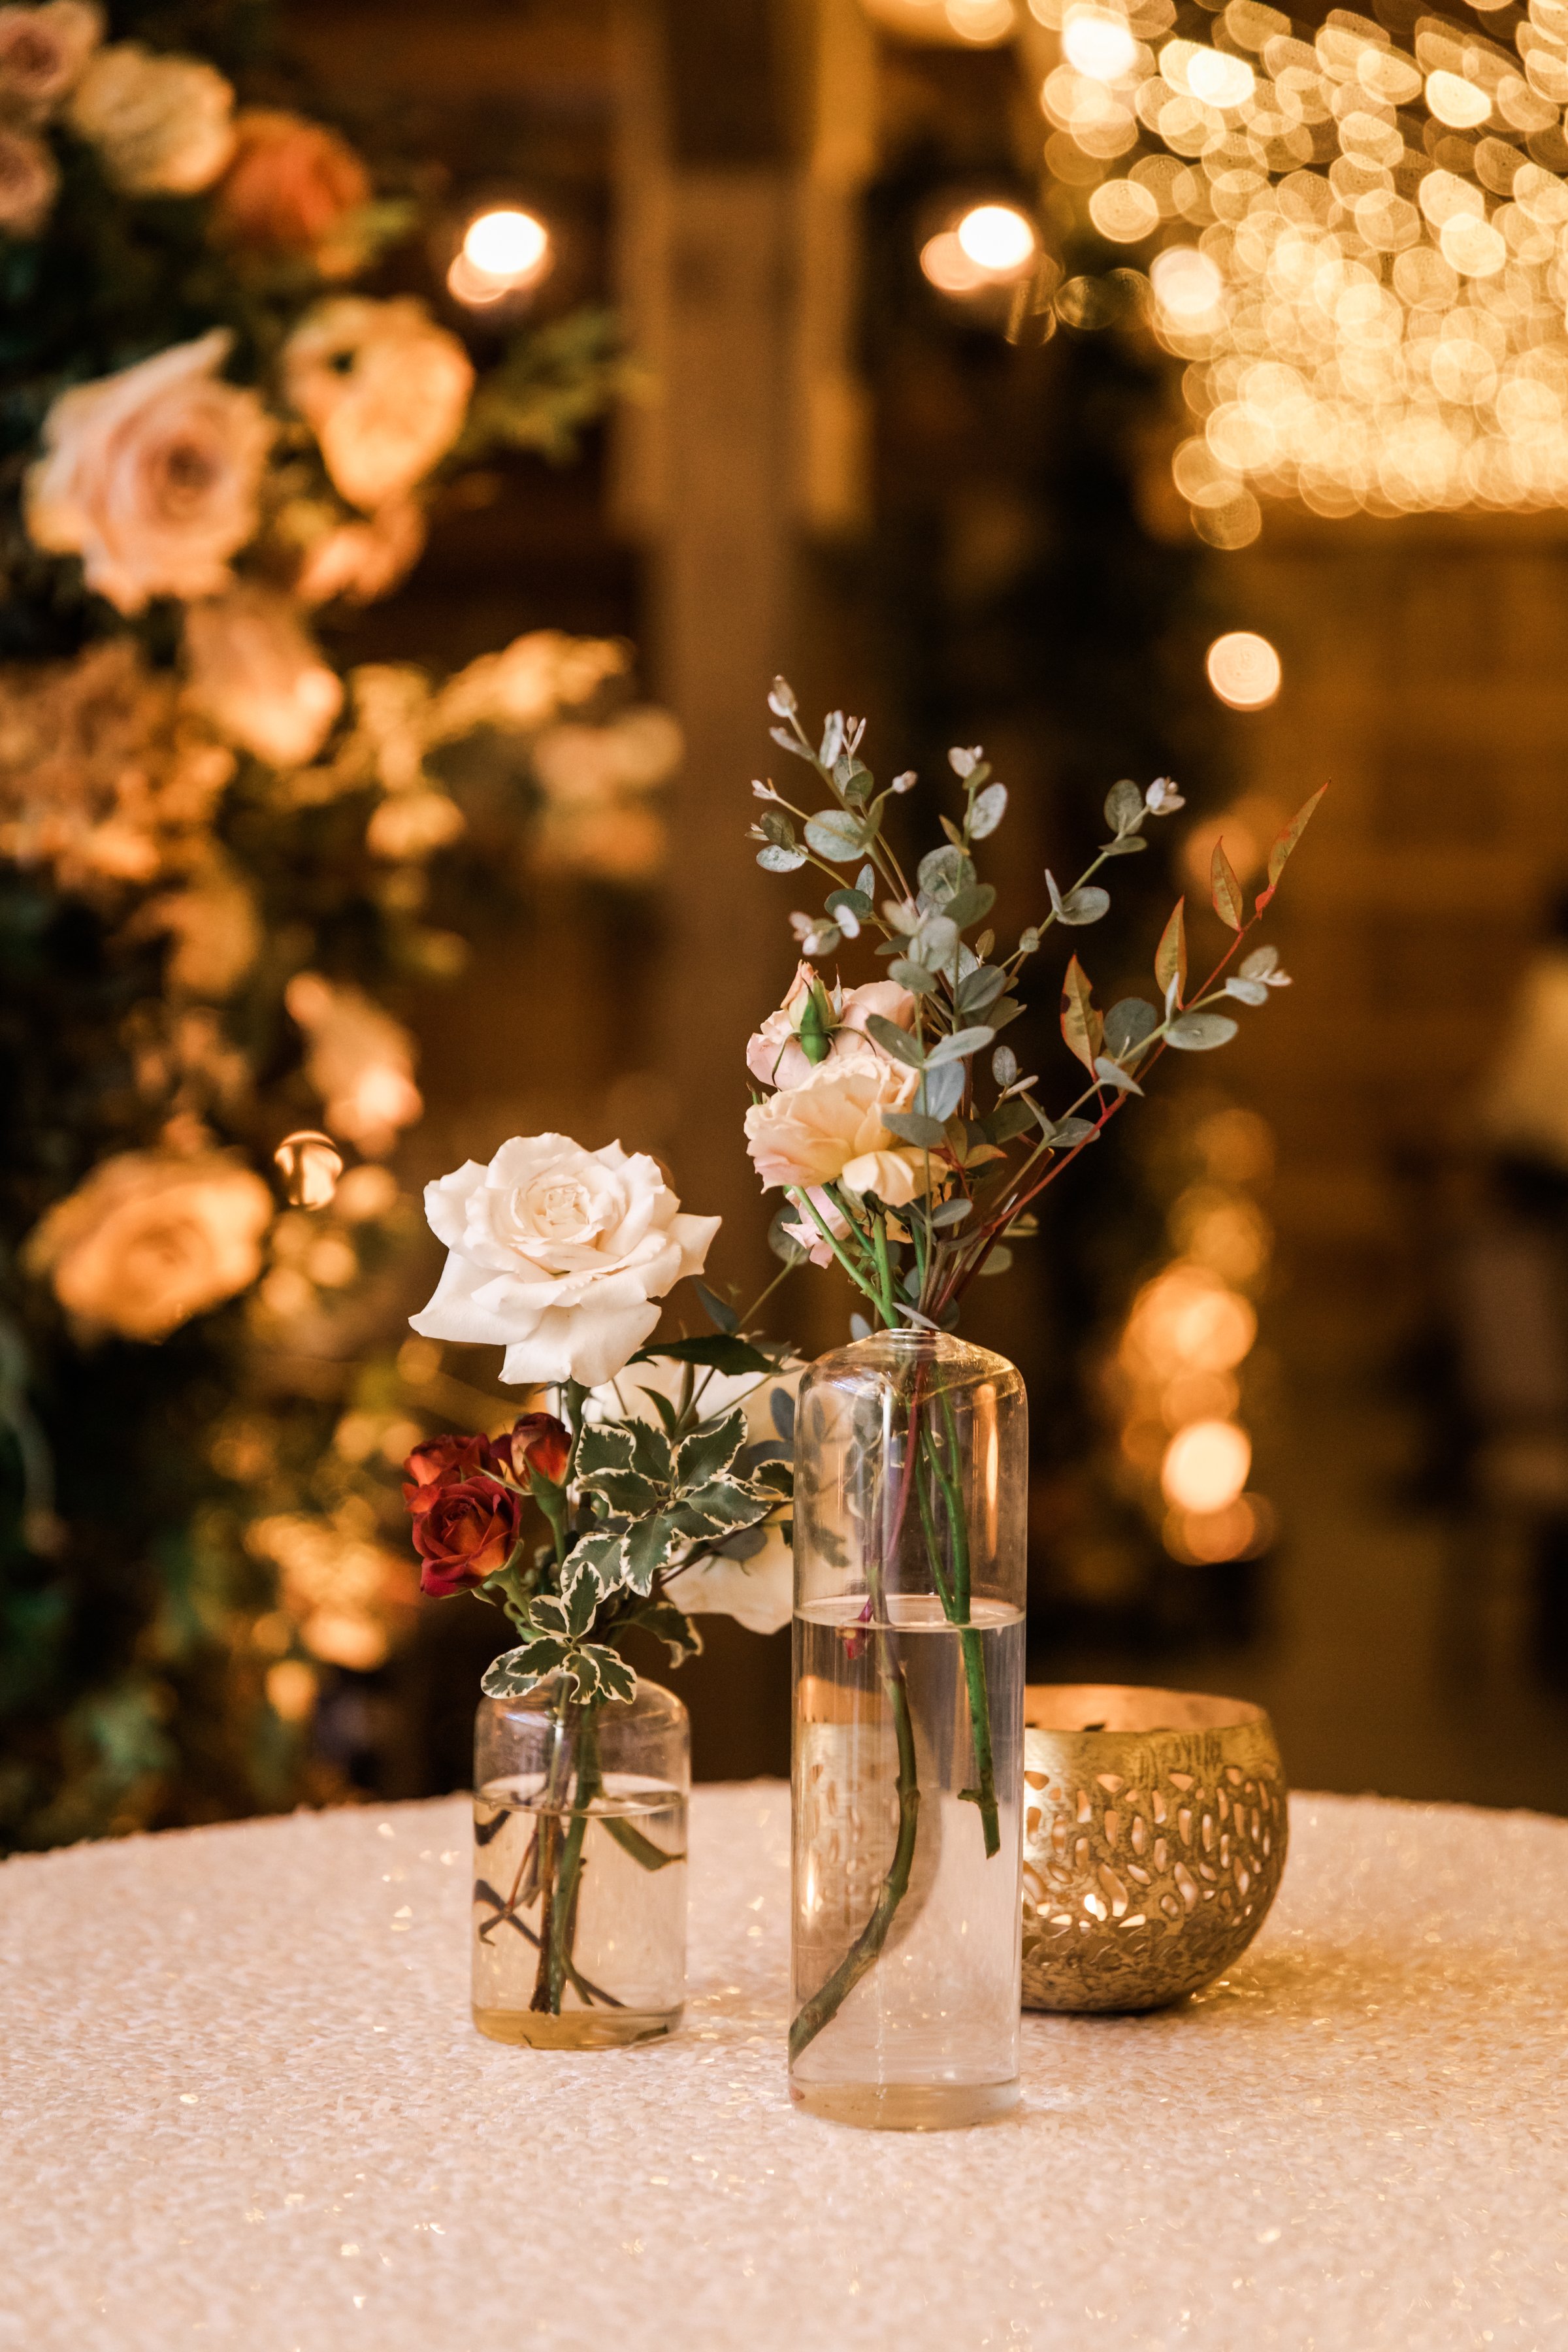 Elegant accents of fall florals, including roses, dahlias, and fall greenery, decorate the reception space of this autumnal wedding. Hues of terra cotta, rose gold, yellow, copper, and dusty pink. Designed by Rosemary and Finch in Nashville, TN.